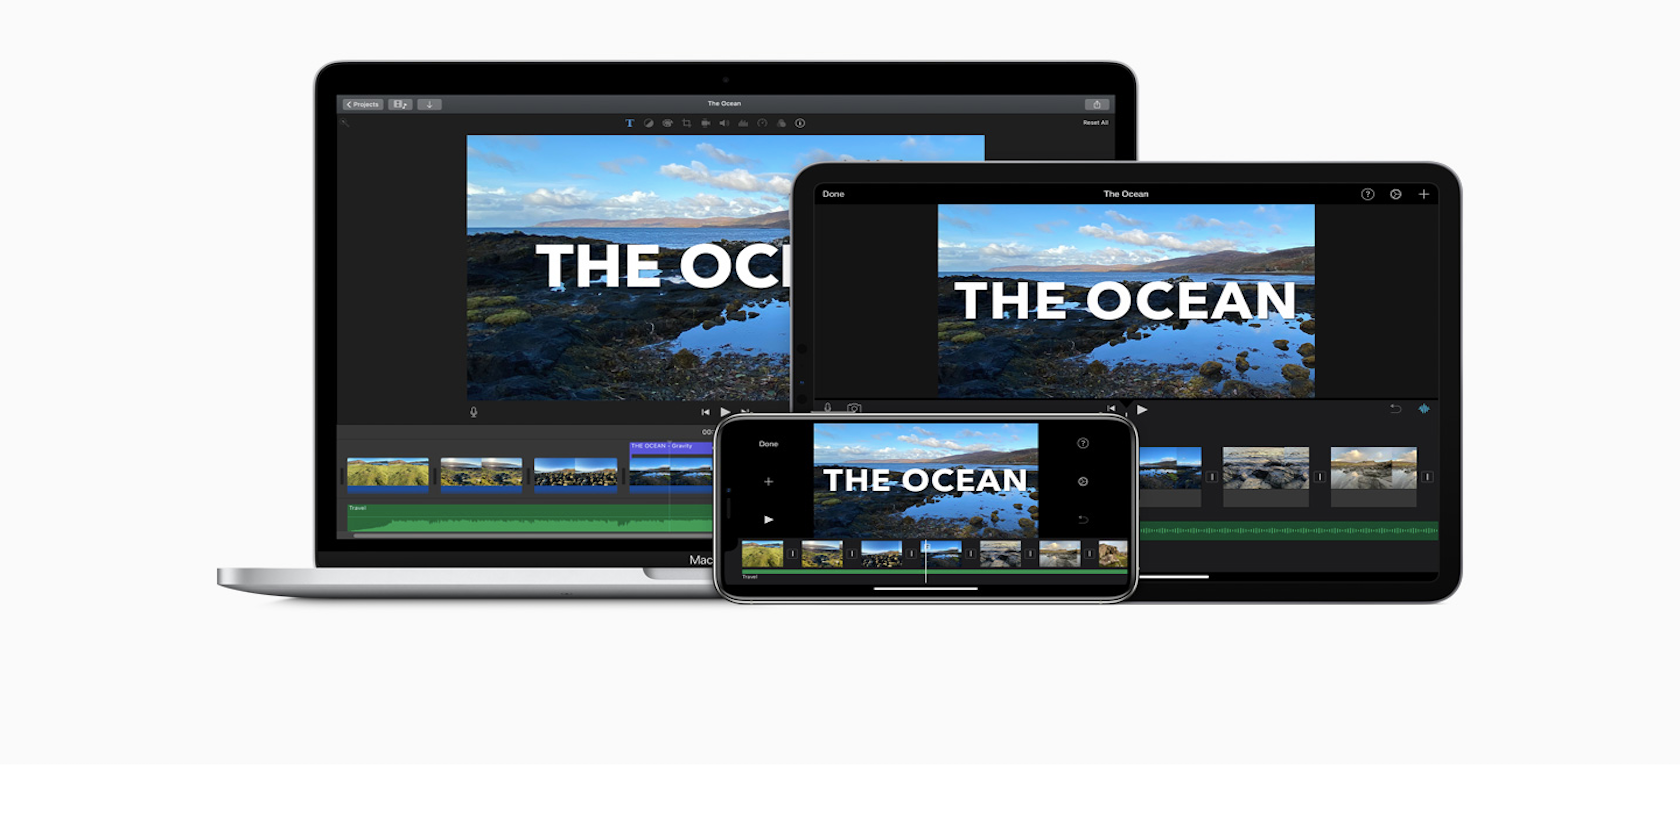 The iMovie home page on the Apple website